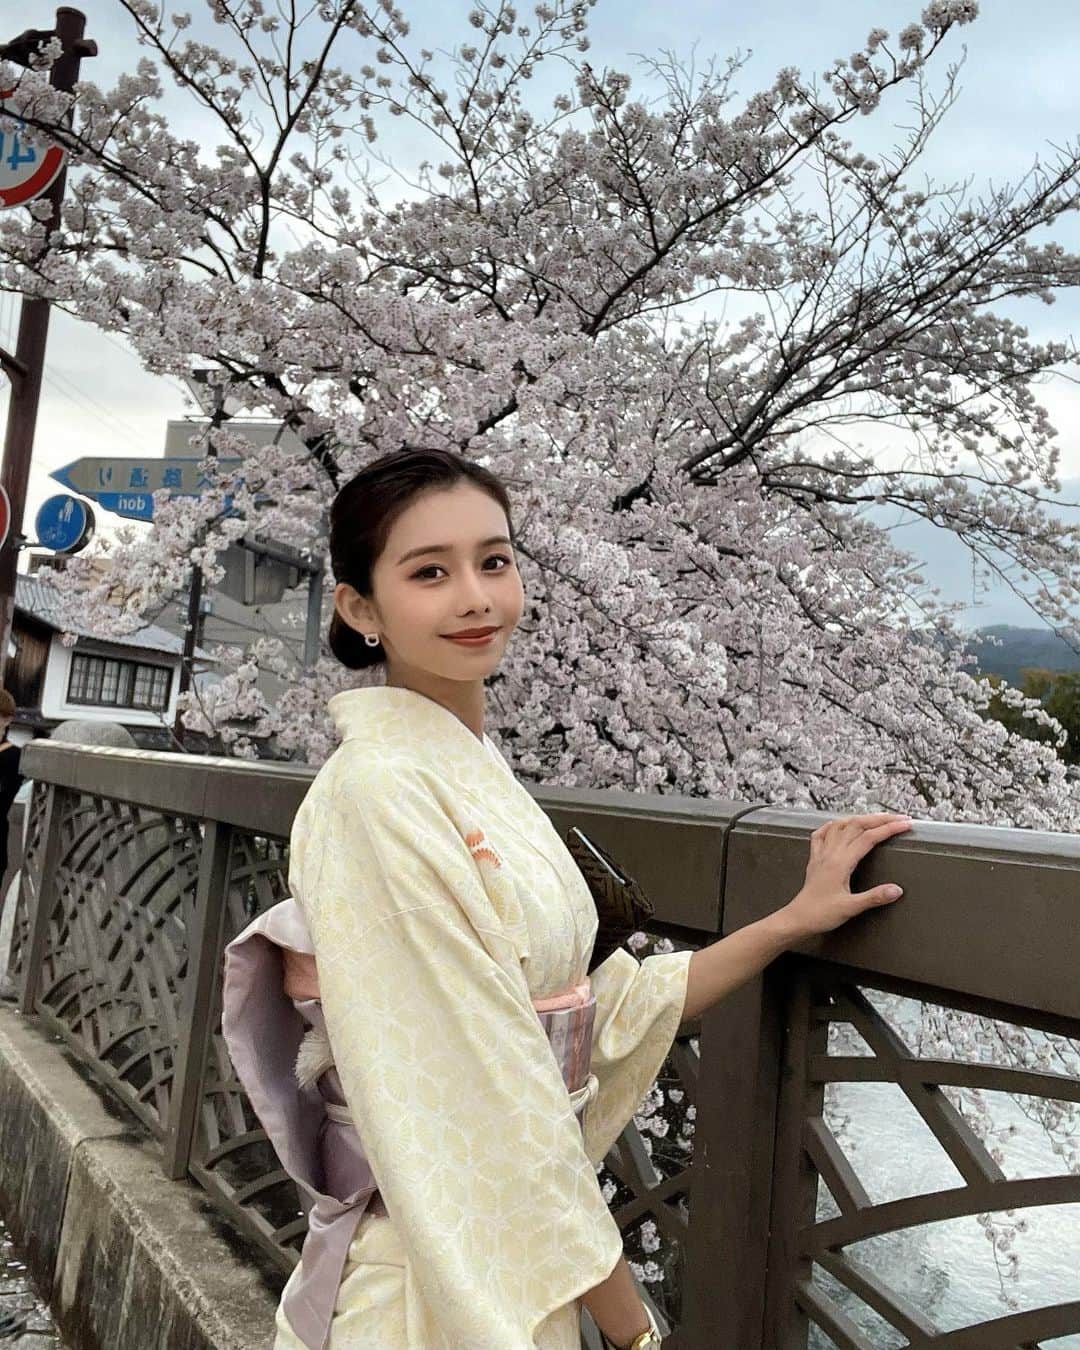 YUKIのインスタグラム：「みんな桜はもう楽しんだ？🌸 . . 来年また桜綺麗な頃に京都で散策したいなぁ❤︎ ちなみにこれ去年の写真🤳笑 . .  Japanese cherry blossoms are very beautiful🌸 I can't help but look forward to this time every year❤︎  #京都 #桜 #満開 #さくら #桜スポット #kyoto #着物 #着物コーディネート #着物レンタル #me #trip #旅行好きな人と繋がりたい #旅行 #kimono #japan #여행사진 #photography」